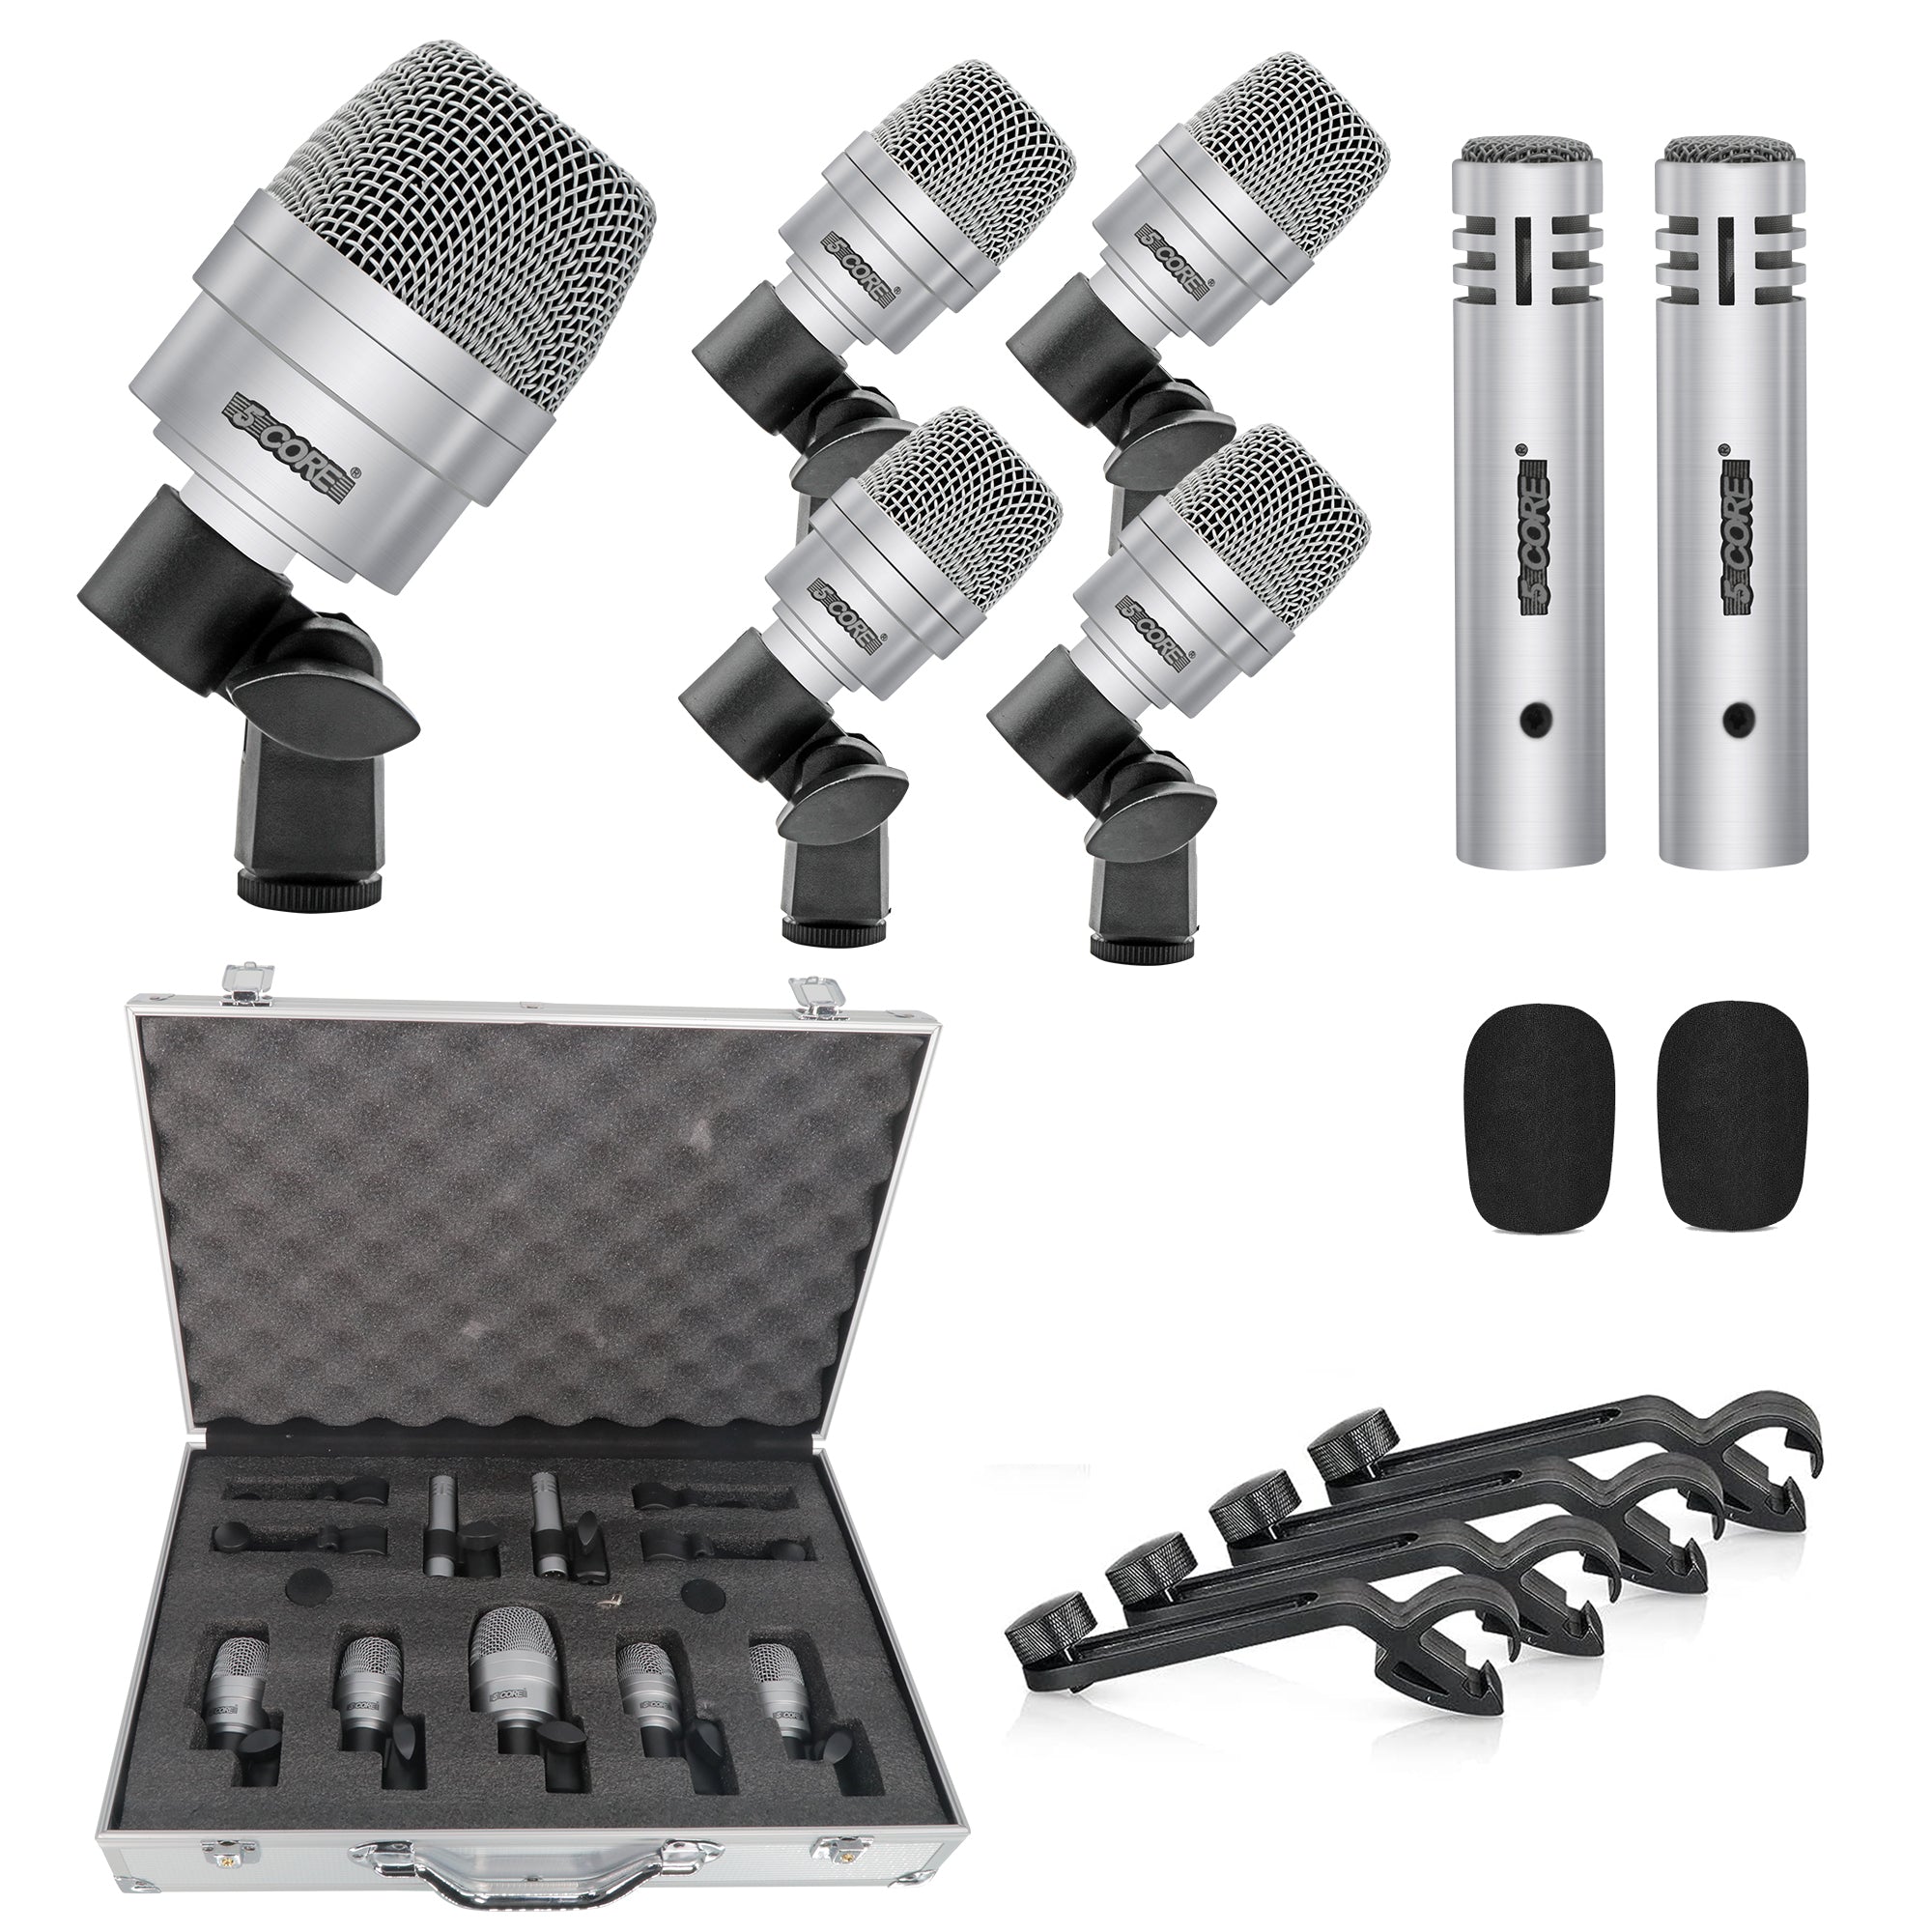 5 CORE 7 Piece Silver Drum Microphone Kit Wired Dynamic XLR Mics Kick Bass Tom Snare and Cymbals Microphones Set for Drums